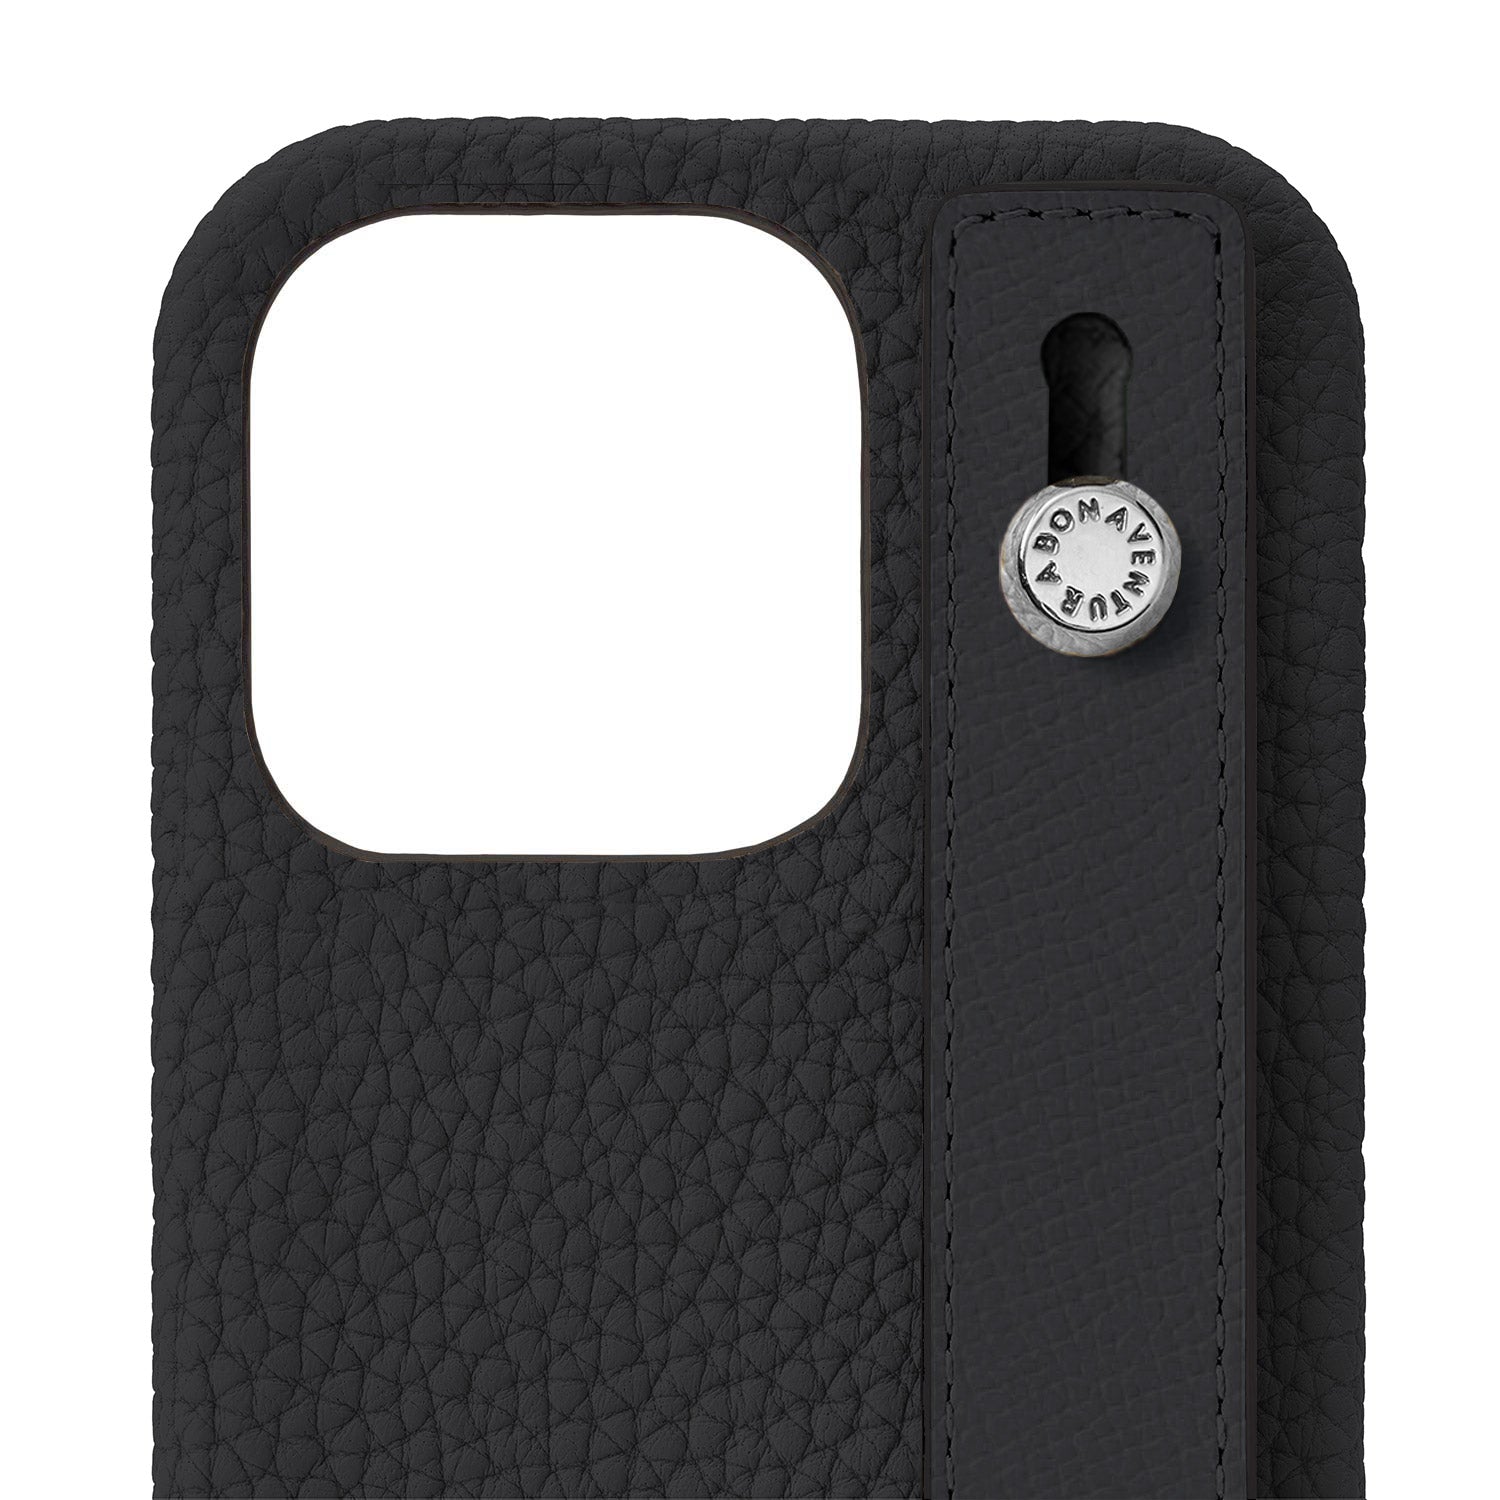 (iPhone 13 Pro) Back cover case with handle, shrink leather